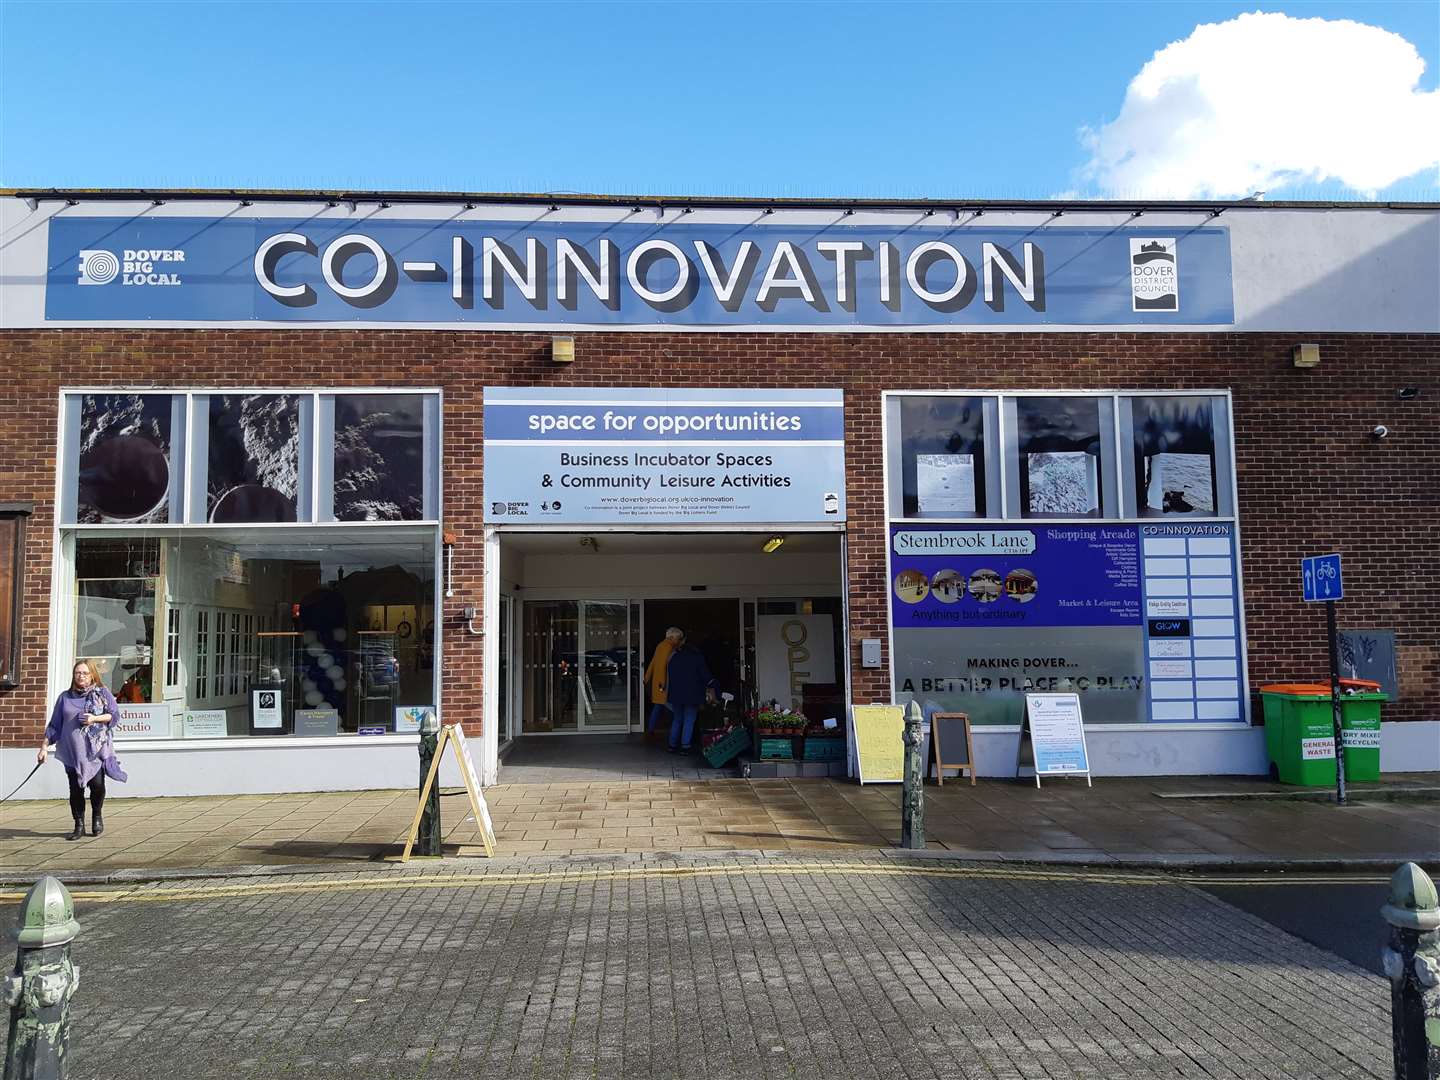 The Co-Innovation building